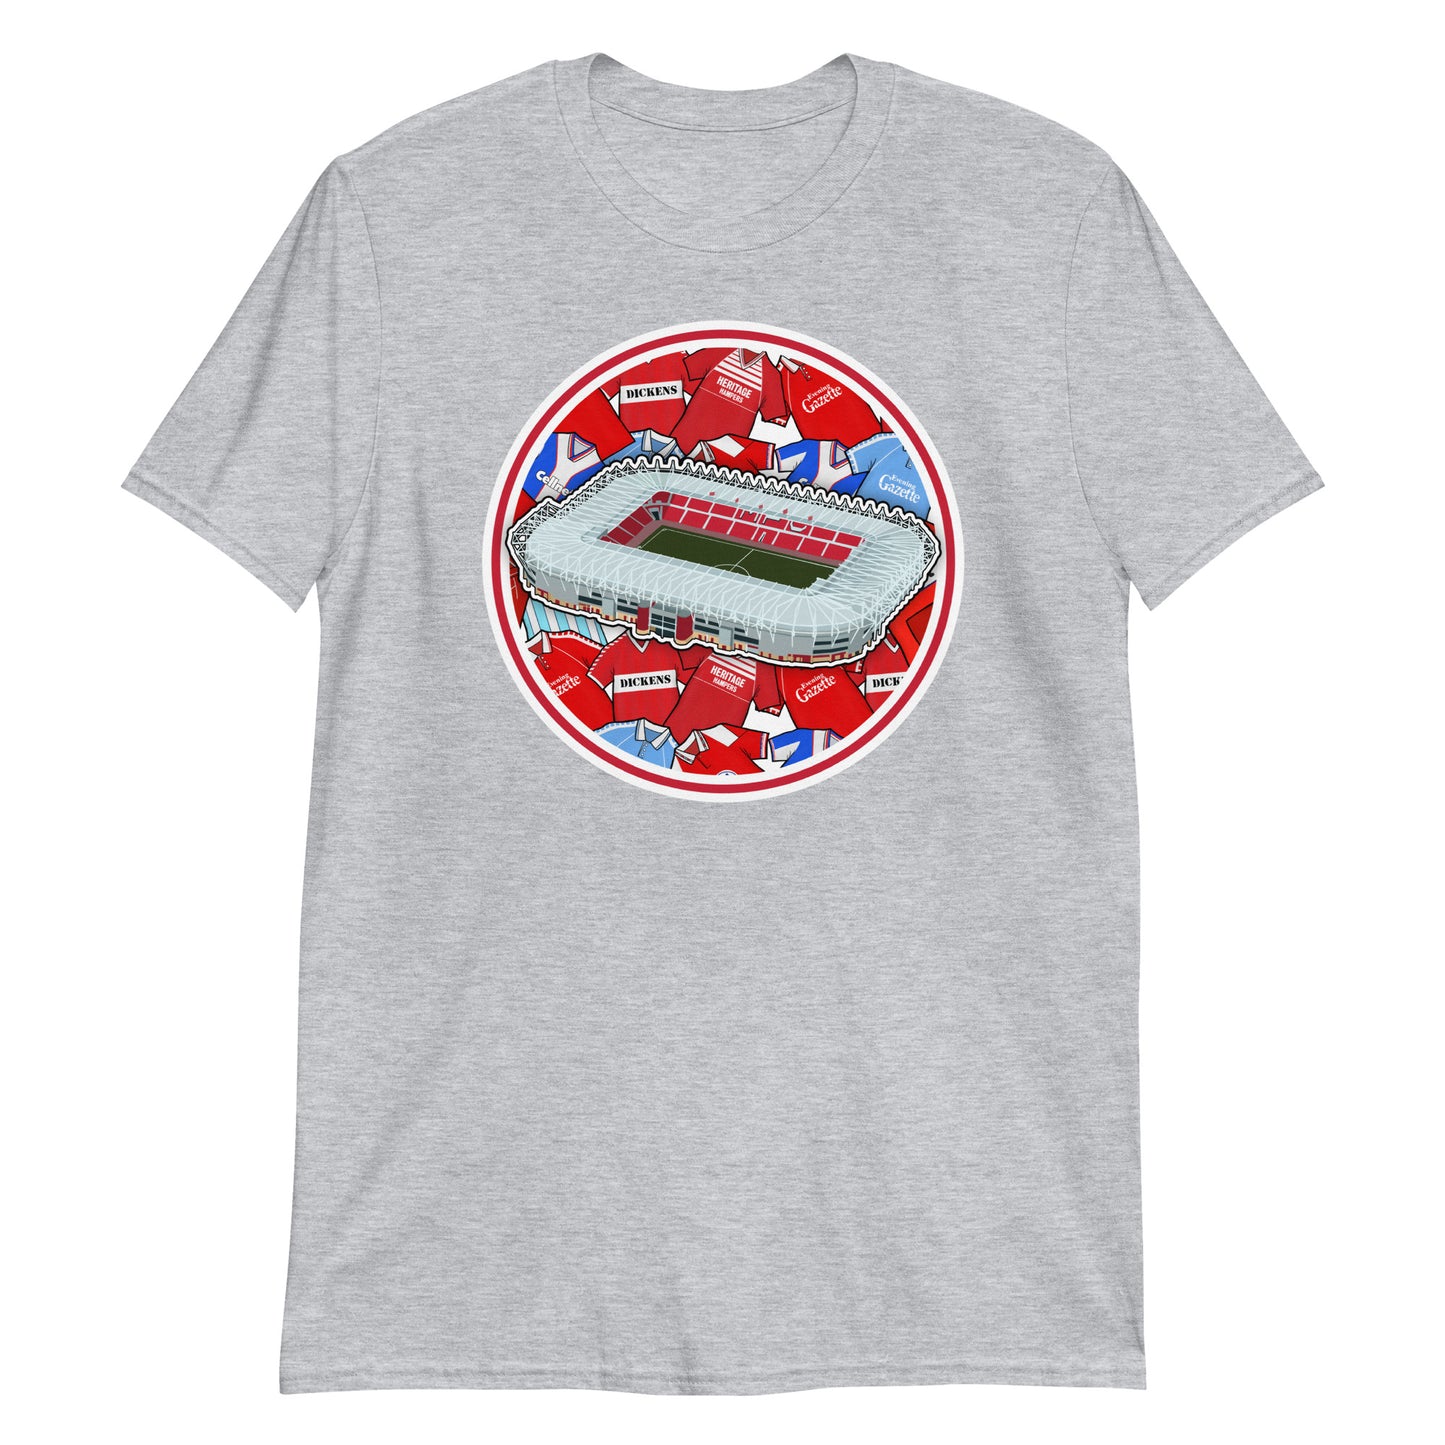 Grey Middlesbrough themed T-shirt with illustrated retro art including the Riverside Stadium in North Yorkshire